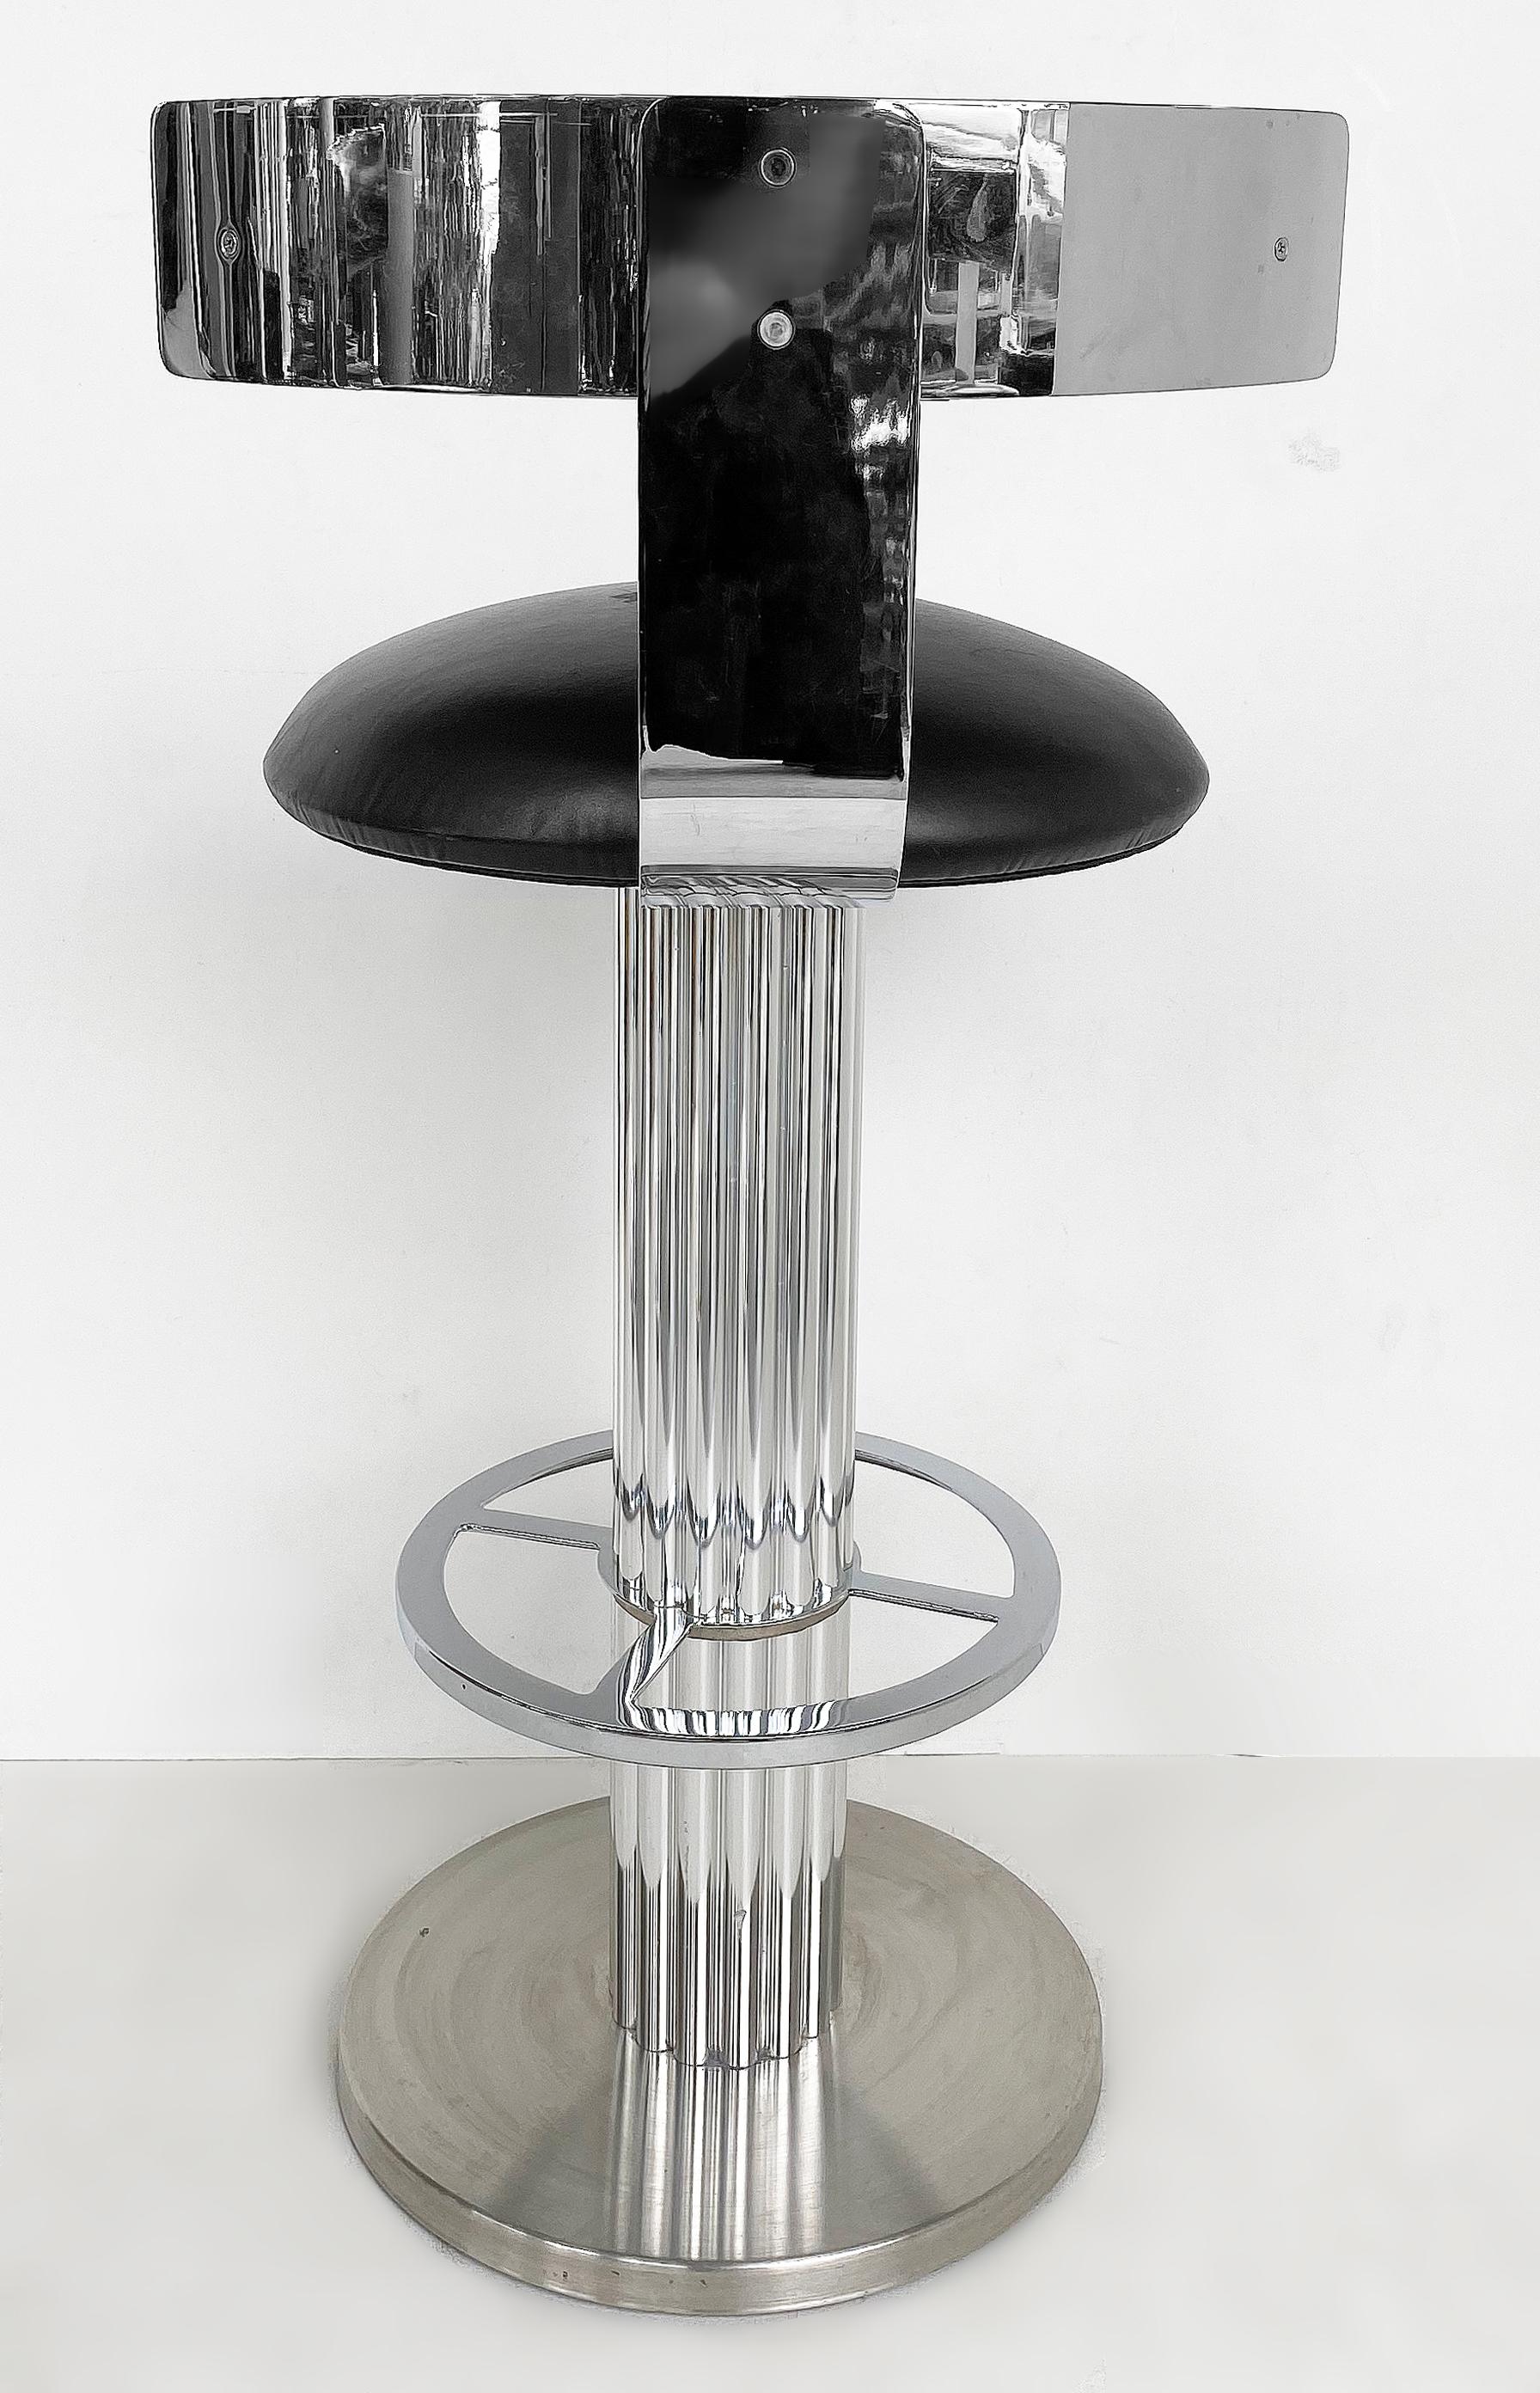 Late 20th Century Design for Leisure Swivel Bar Stools with Chrome, Nickeled Steel, Black Leather